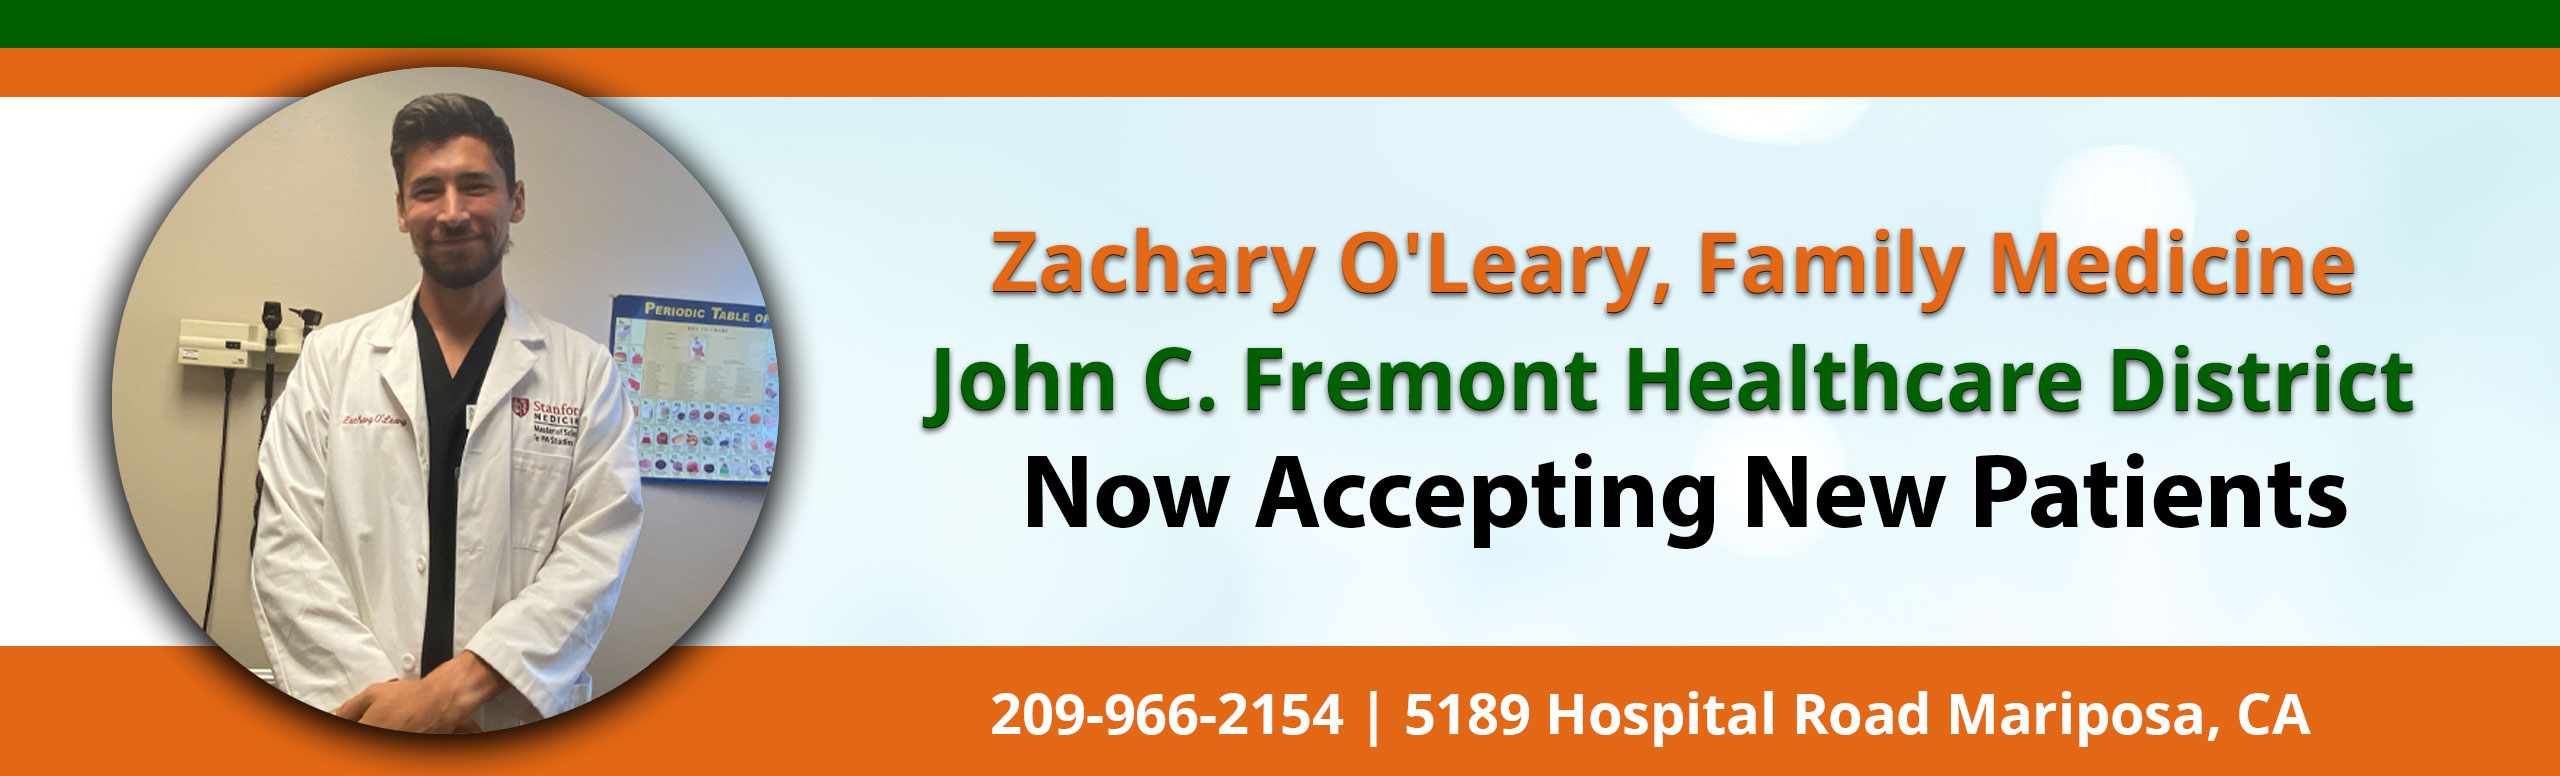 Banner picture of Dr. O'Leary smiling. Banner says:

Zachary O' Leary, Family Medicine
John C.Fremont Healthcare District
Now Accepting New Patients

209-966-2154 | 5189 Hospital Road Mariposa, CA